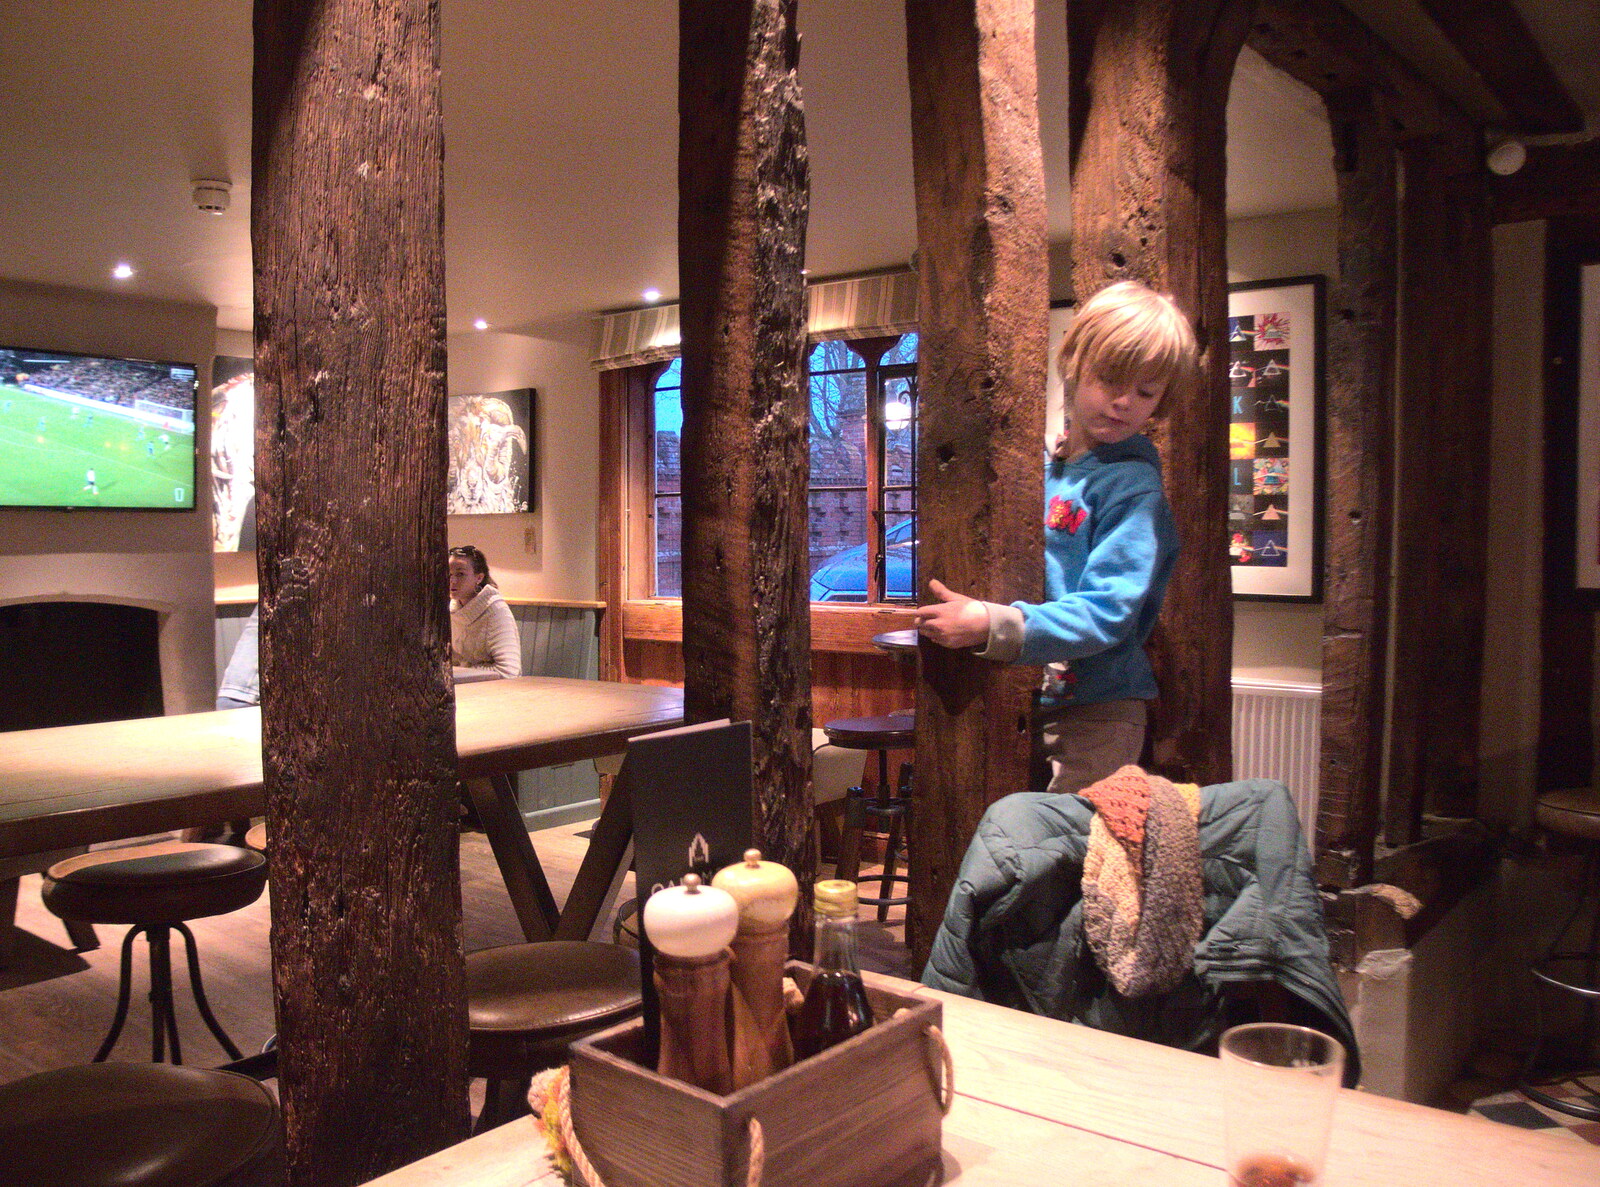 Harry climbs around in the timbers from The G-Unit's Birthday, Brome, Suffolk - 20th January 2019